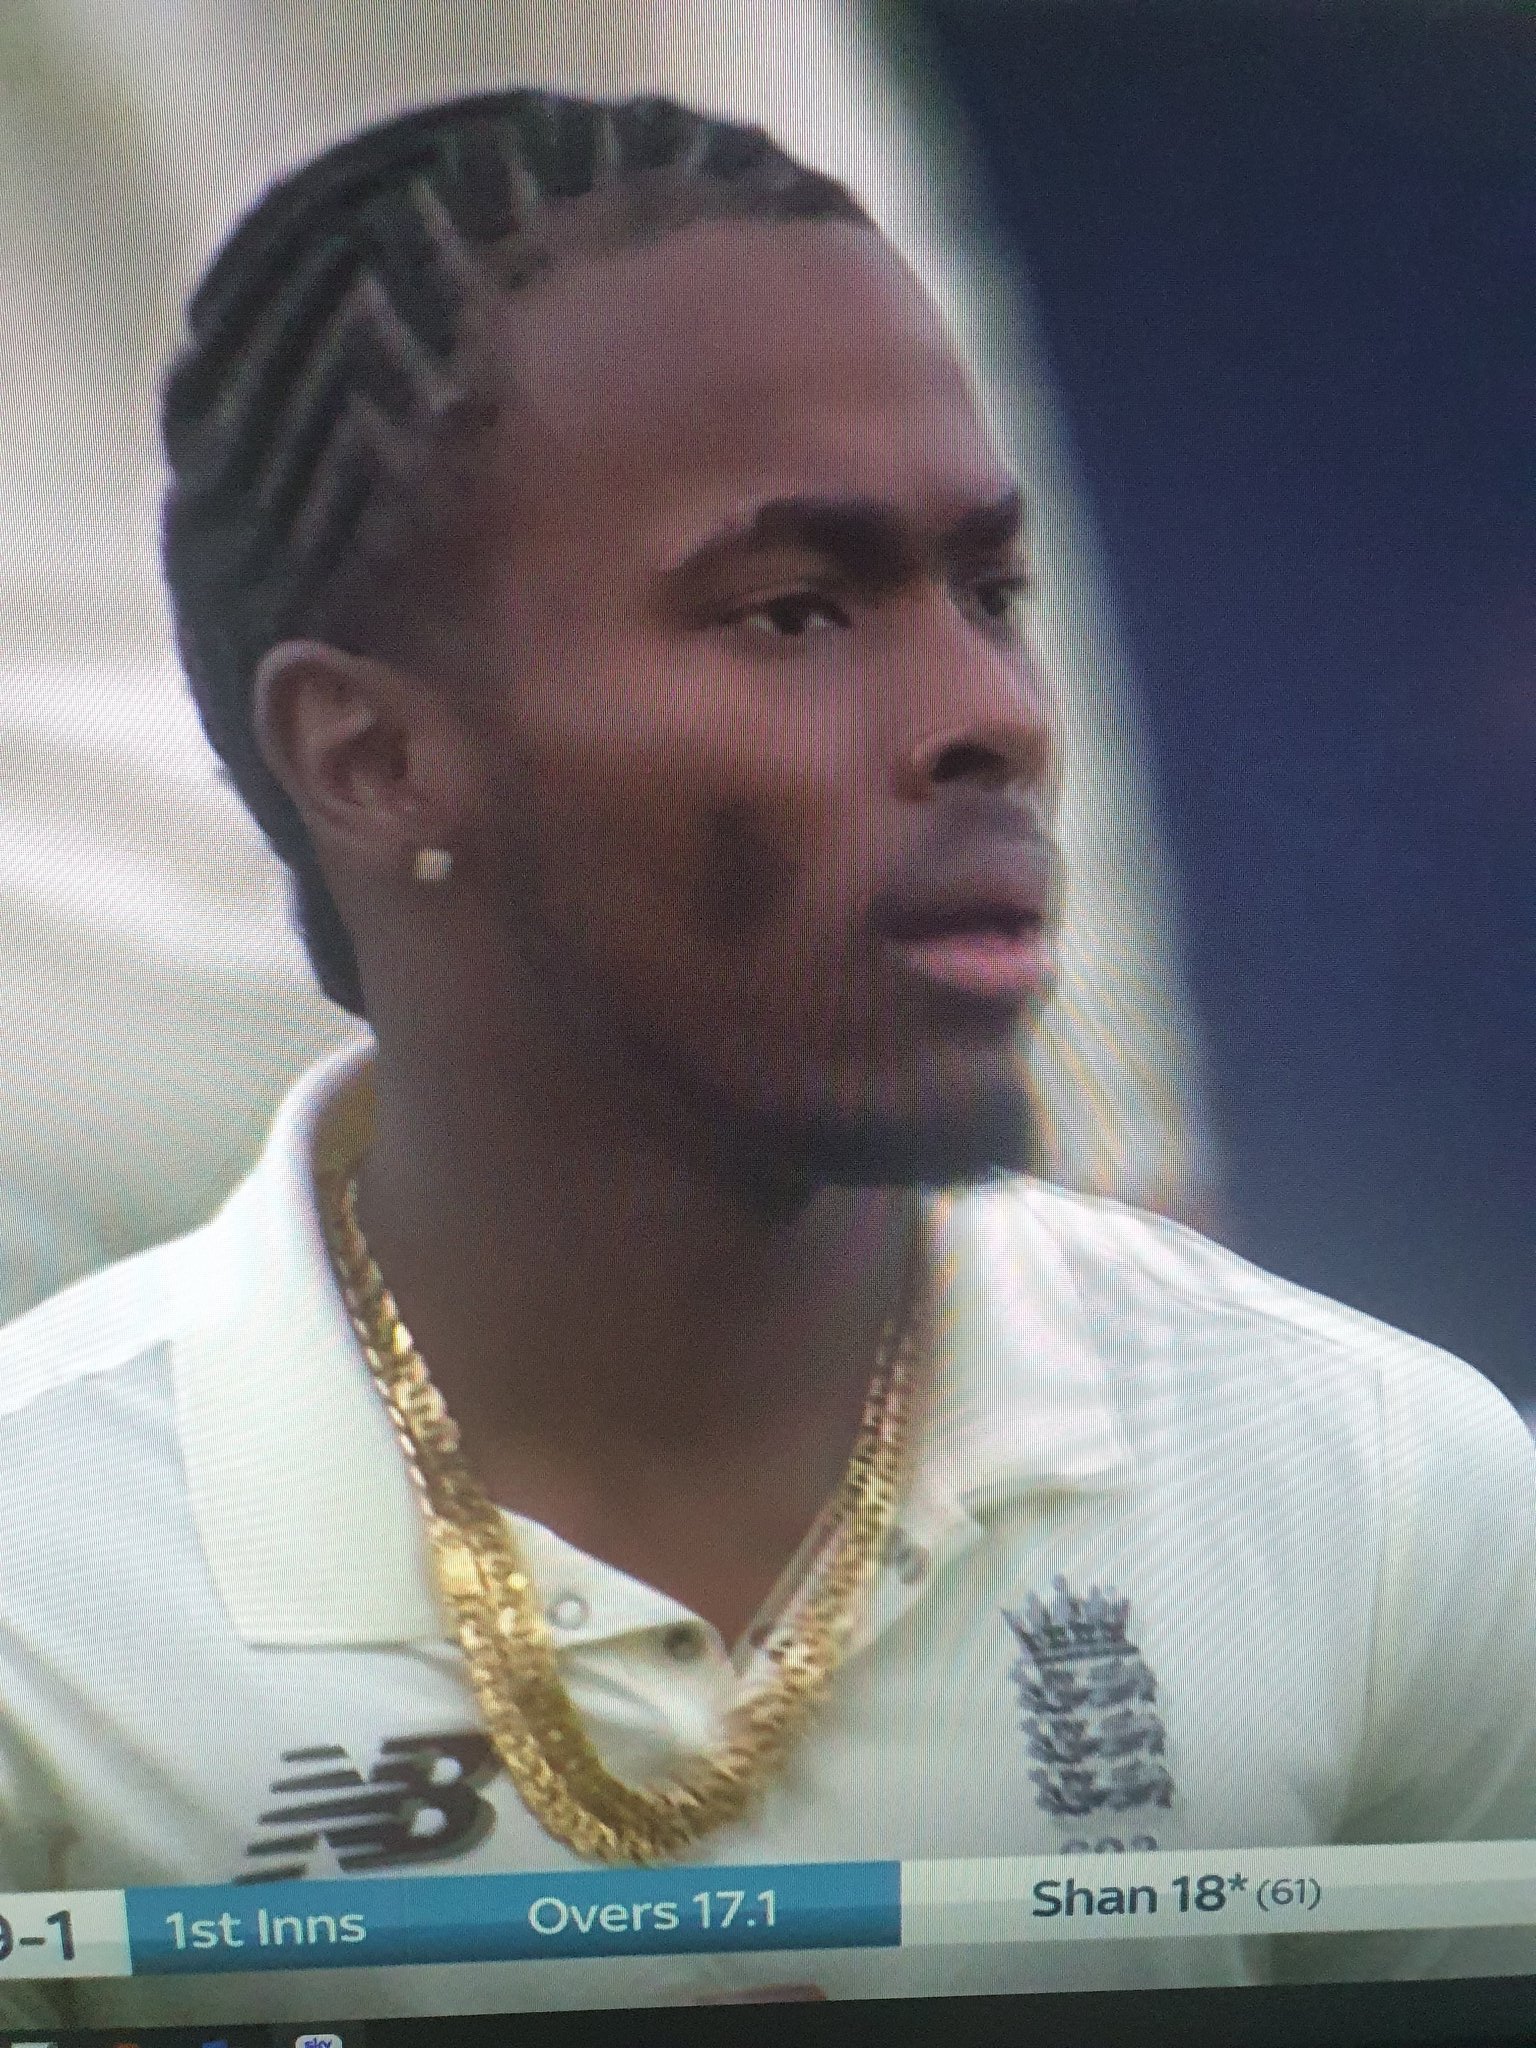 5 times Jofra Archer tweeted against the Asian teams and their players